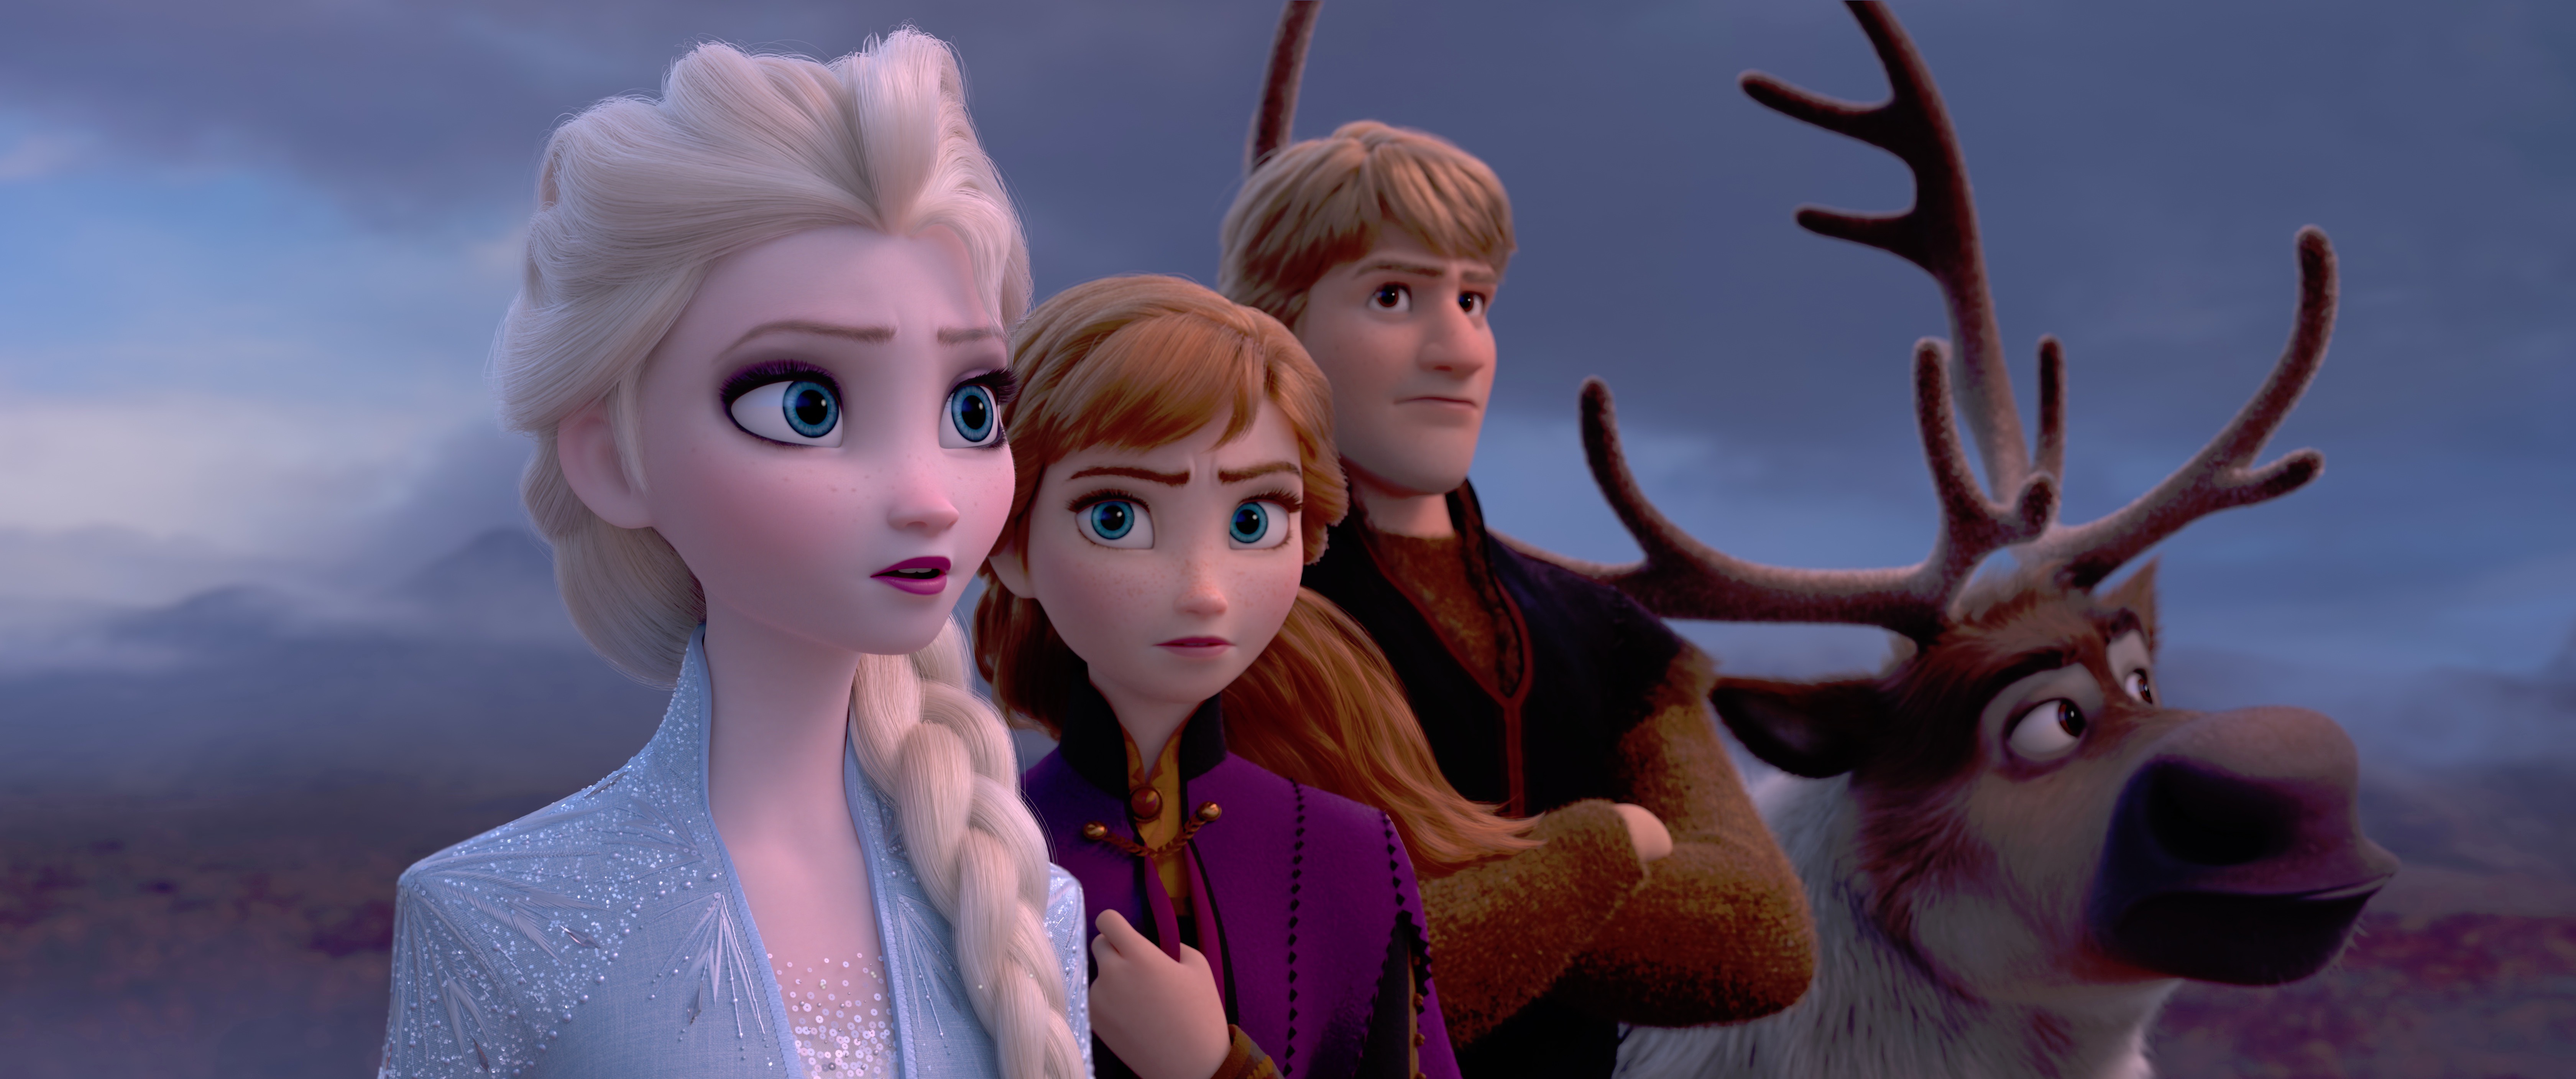 Frozen 2 Is Coming To Rescue Your Kids From Boredom, As Disney Is Set To Release It Early!